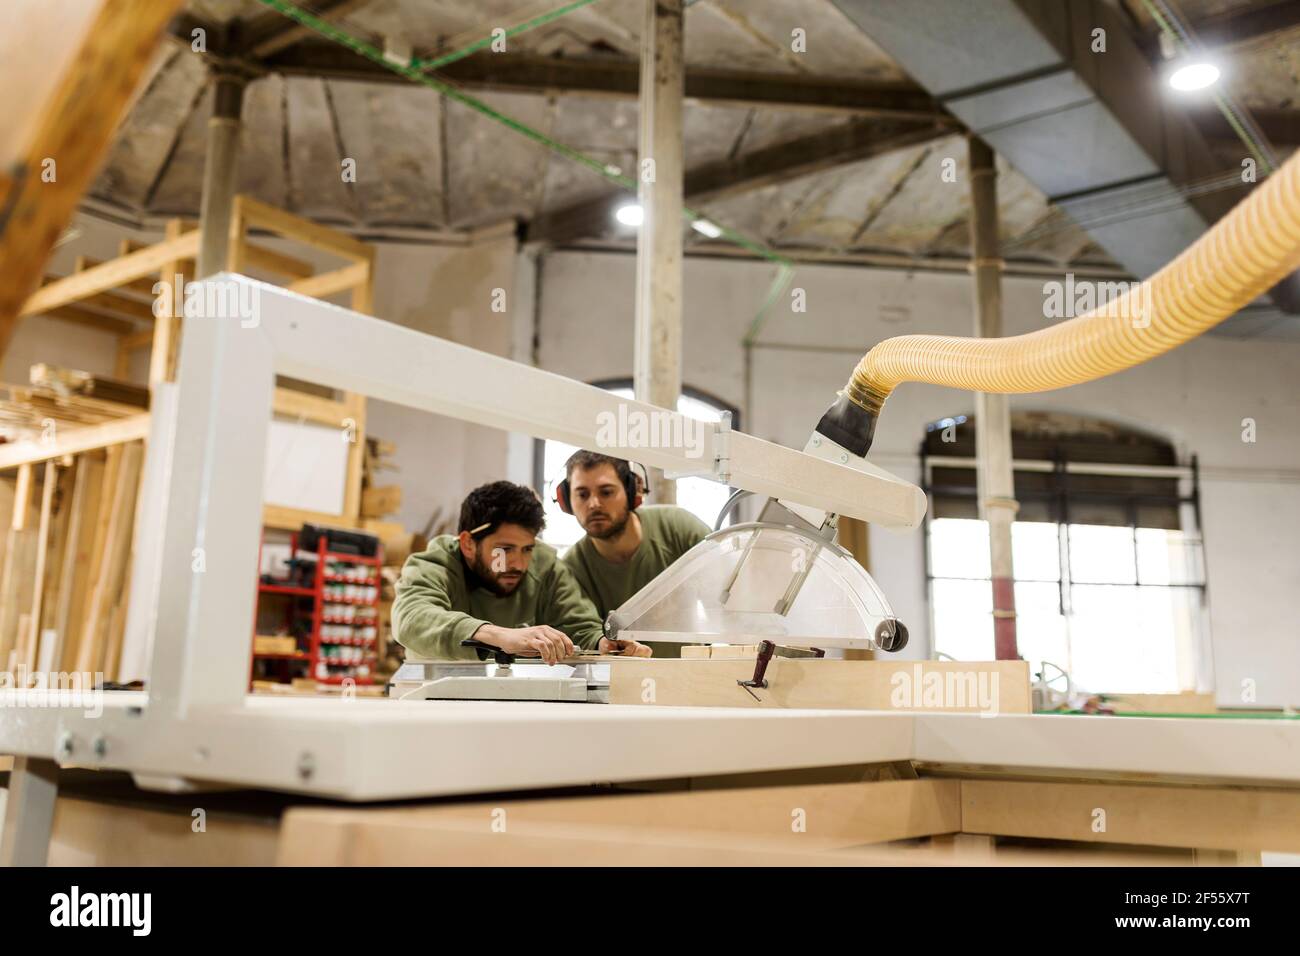 Craftsmen working at table saw in industry Stock Photo